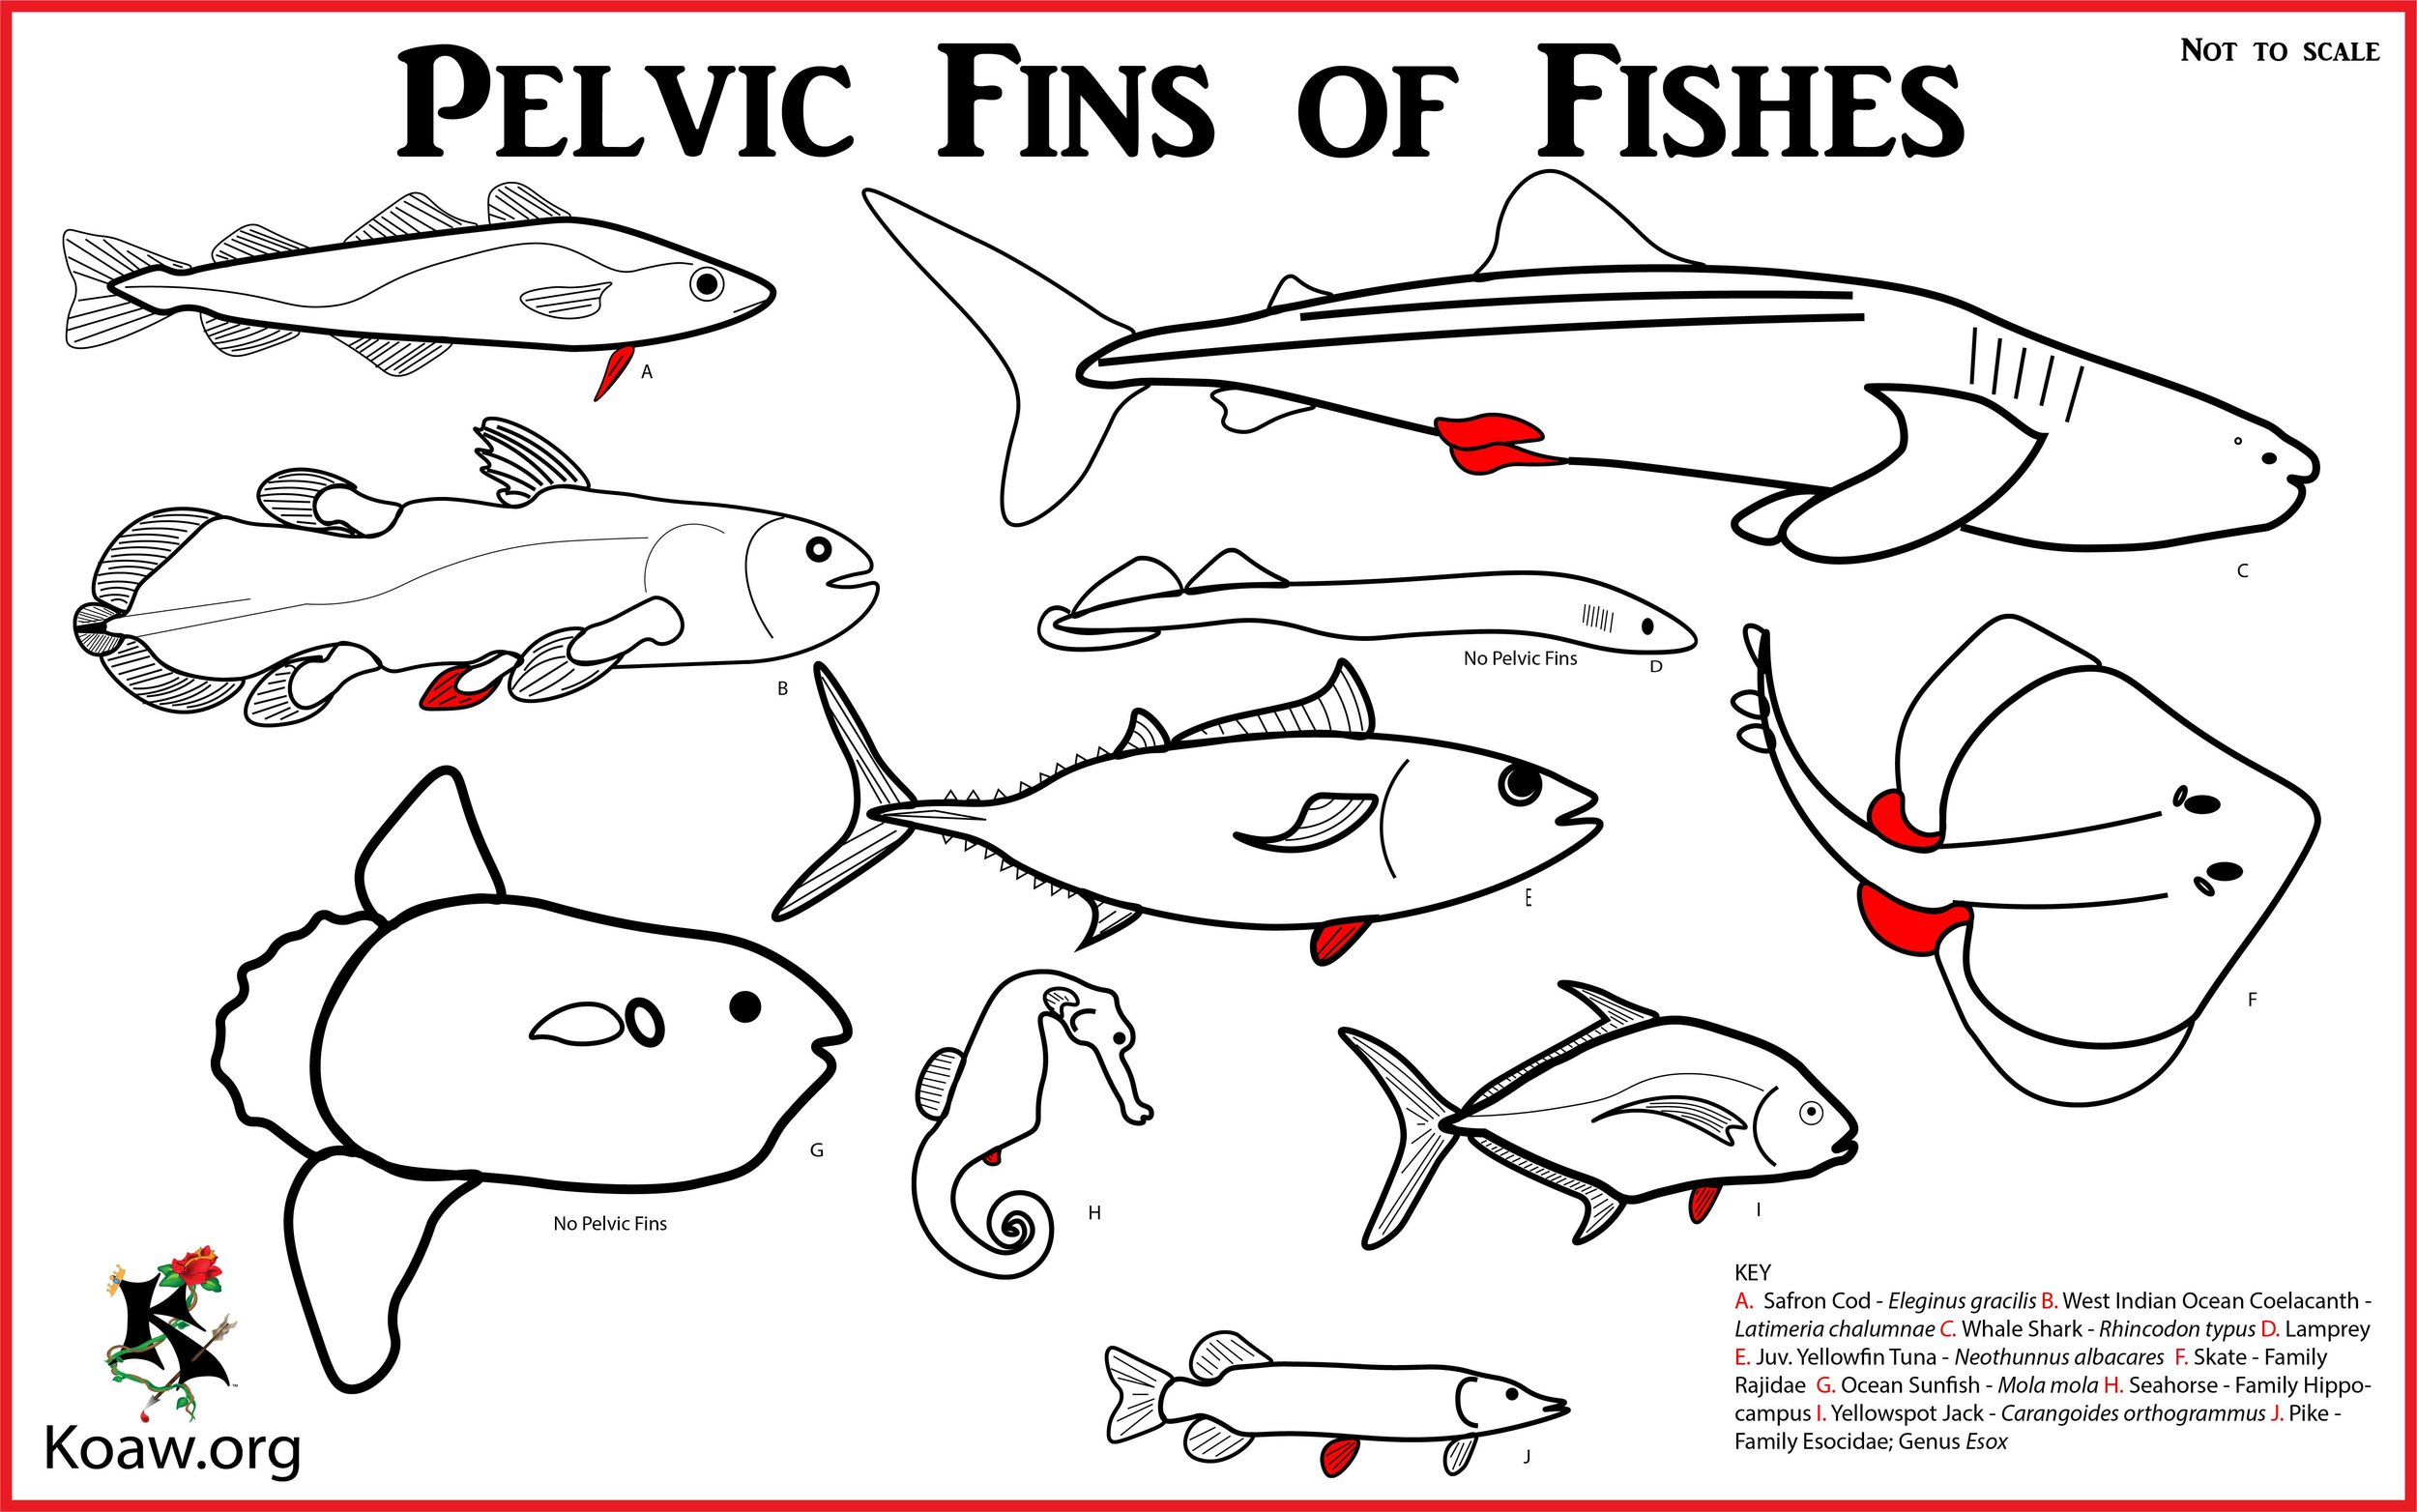 Pelvic Fins of Fishes - Illustration by Koaw